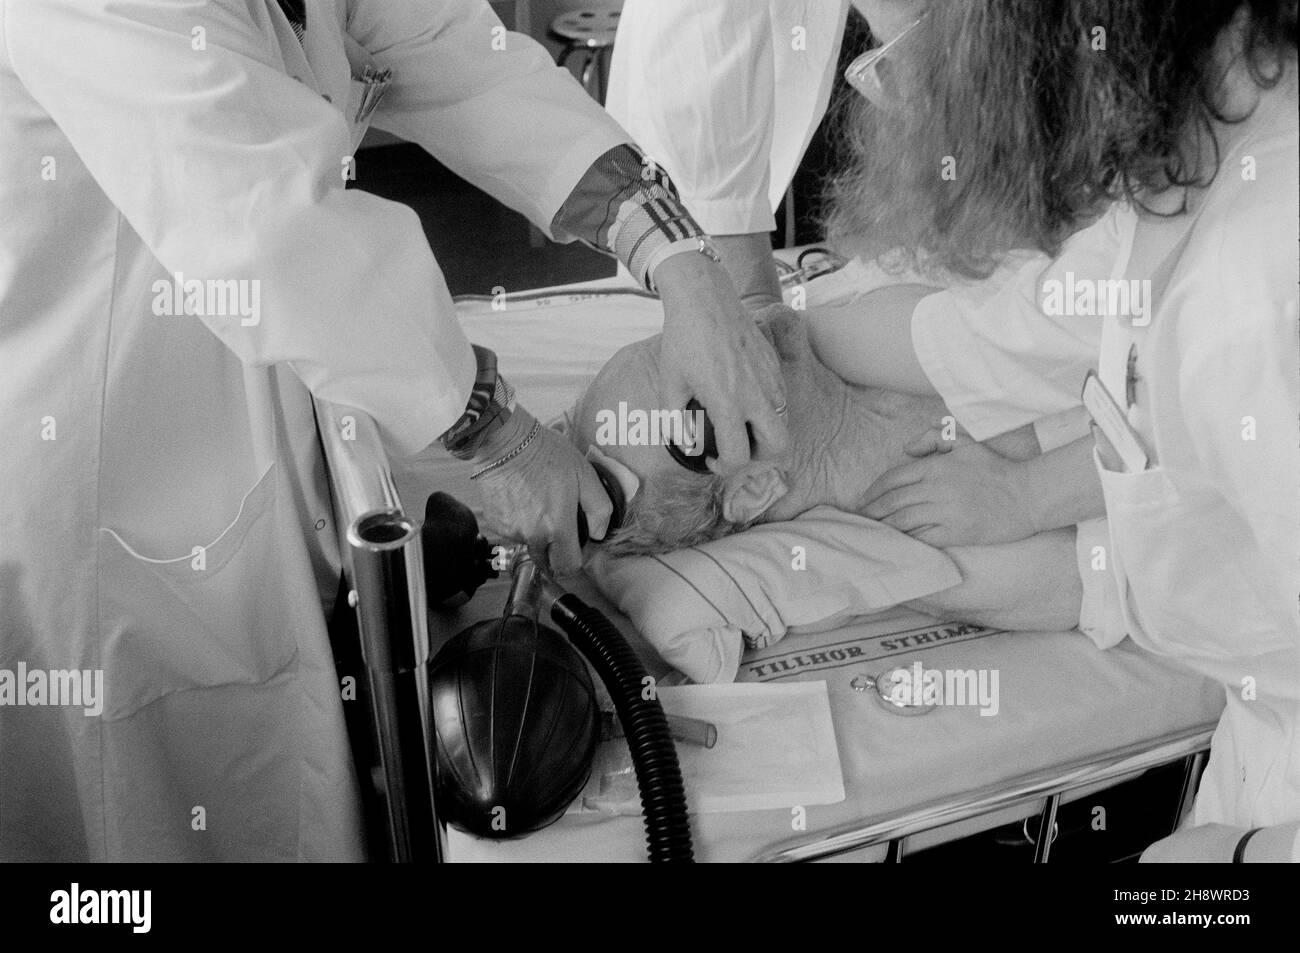 https://c8.alamy.com/comp/2H8WRD3/old-man-receiving-electroconvulsive-therapy-at-mental-hospital-beckomberga-sjukhus-in-bromma-stockholm-sweden-photo-taken-during-the-1980s-with-a-nurse-holding-the-patient-and-a-doctor-applying-the-ect-pedals-to-the-old-mans-head-2H8WRD3.jpg